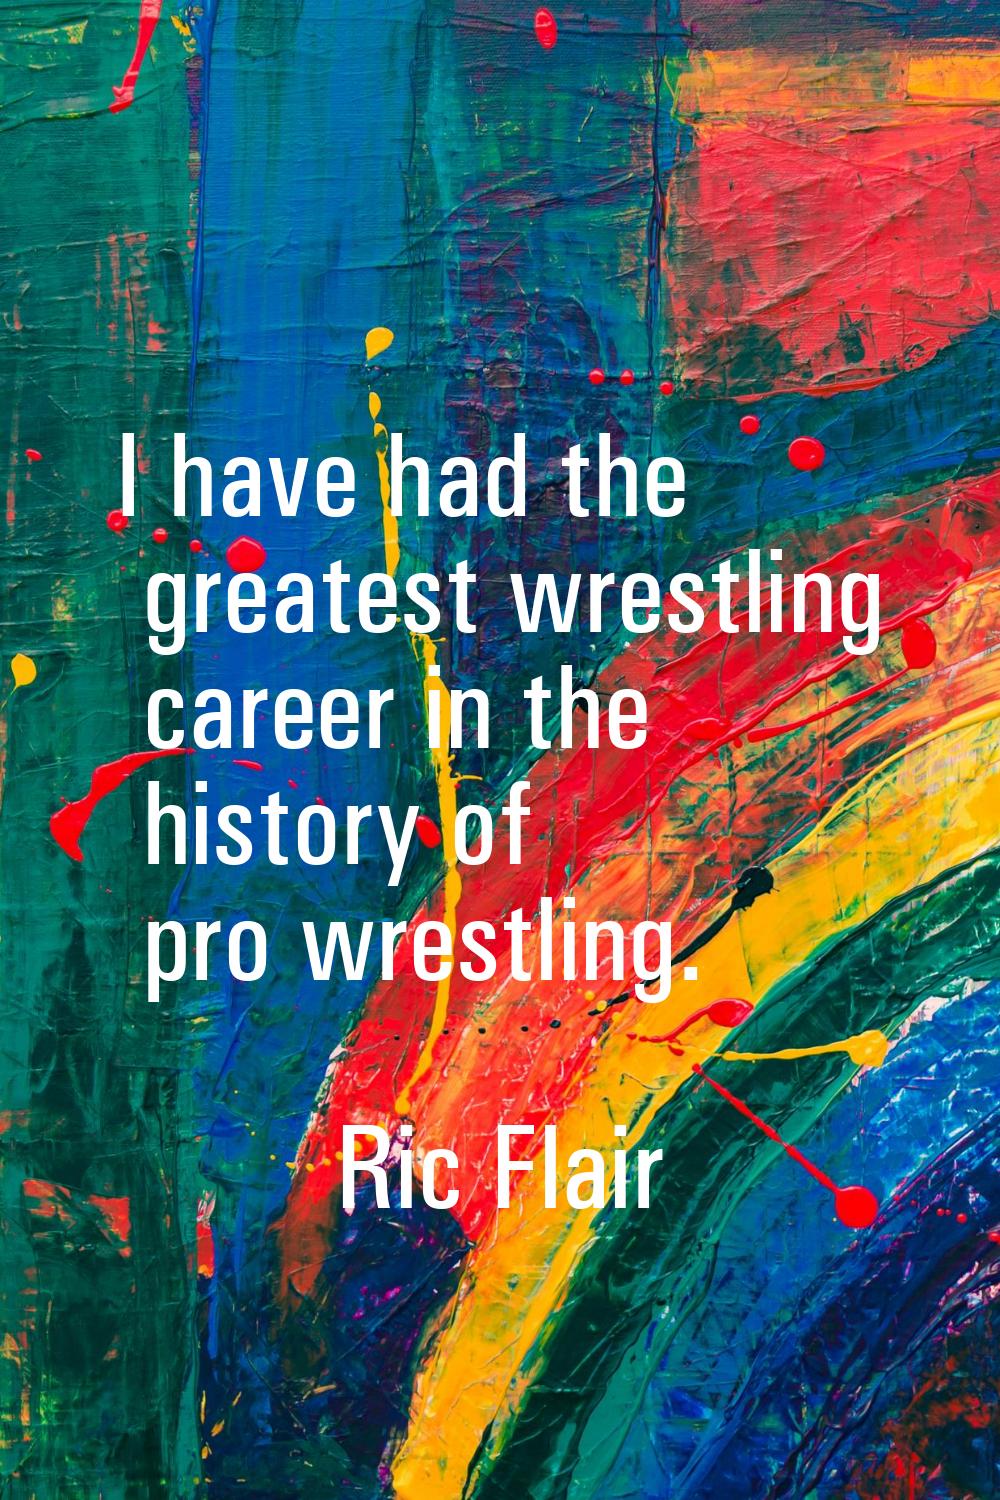 I have had the greatest wrestling career in the history of pro wrestling.